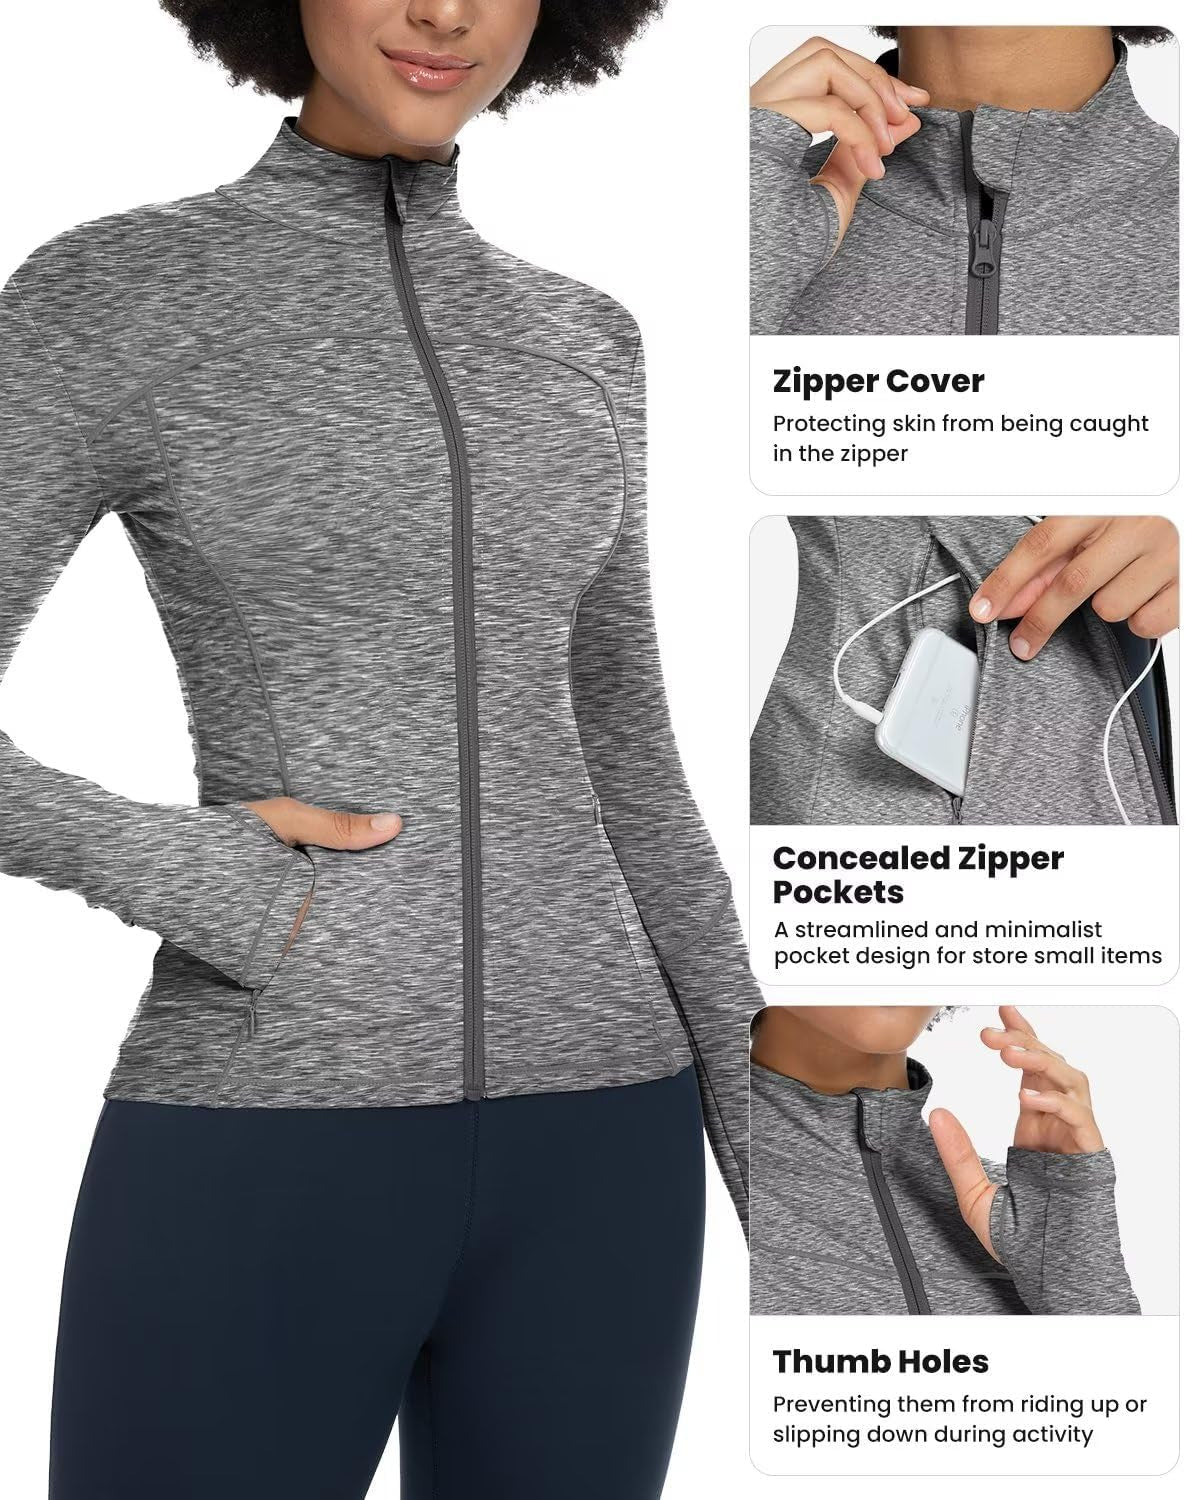 "Enhance Your Style and Energize Your Workout with the Premium Women's Full Zip Athletic Running Jacket - Ideal for Fitness, Yoga, and Exercise!"